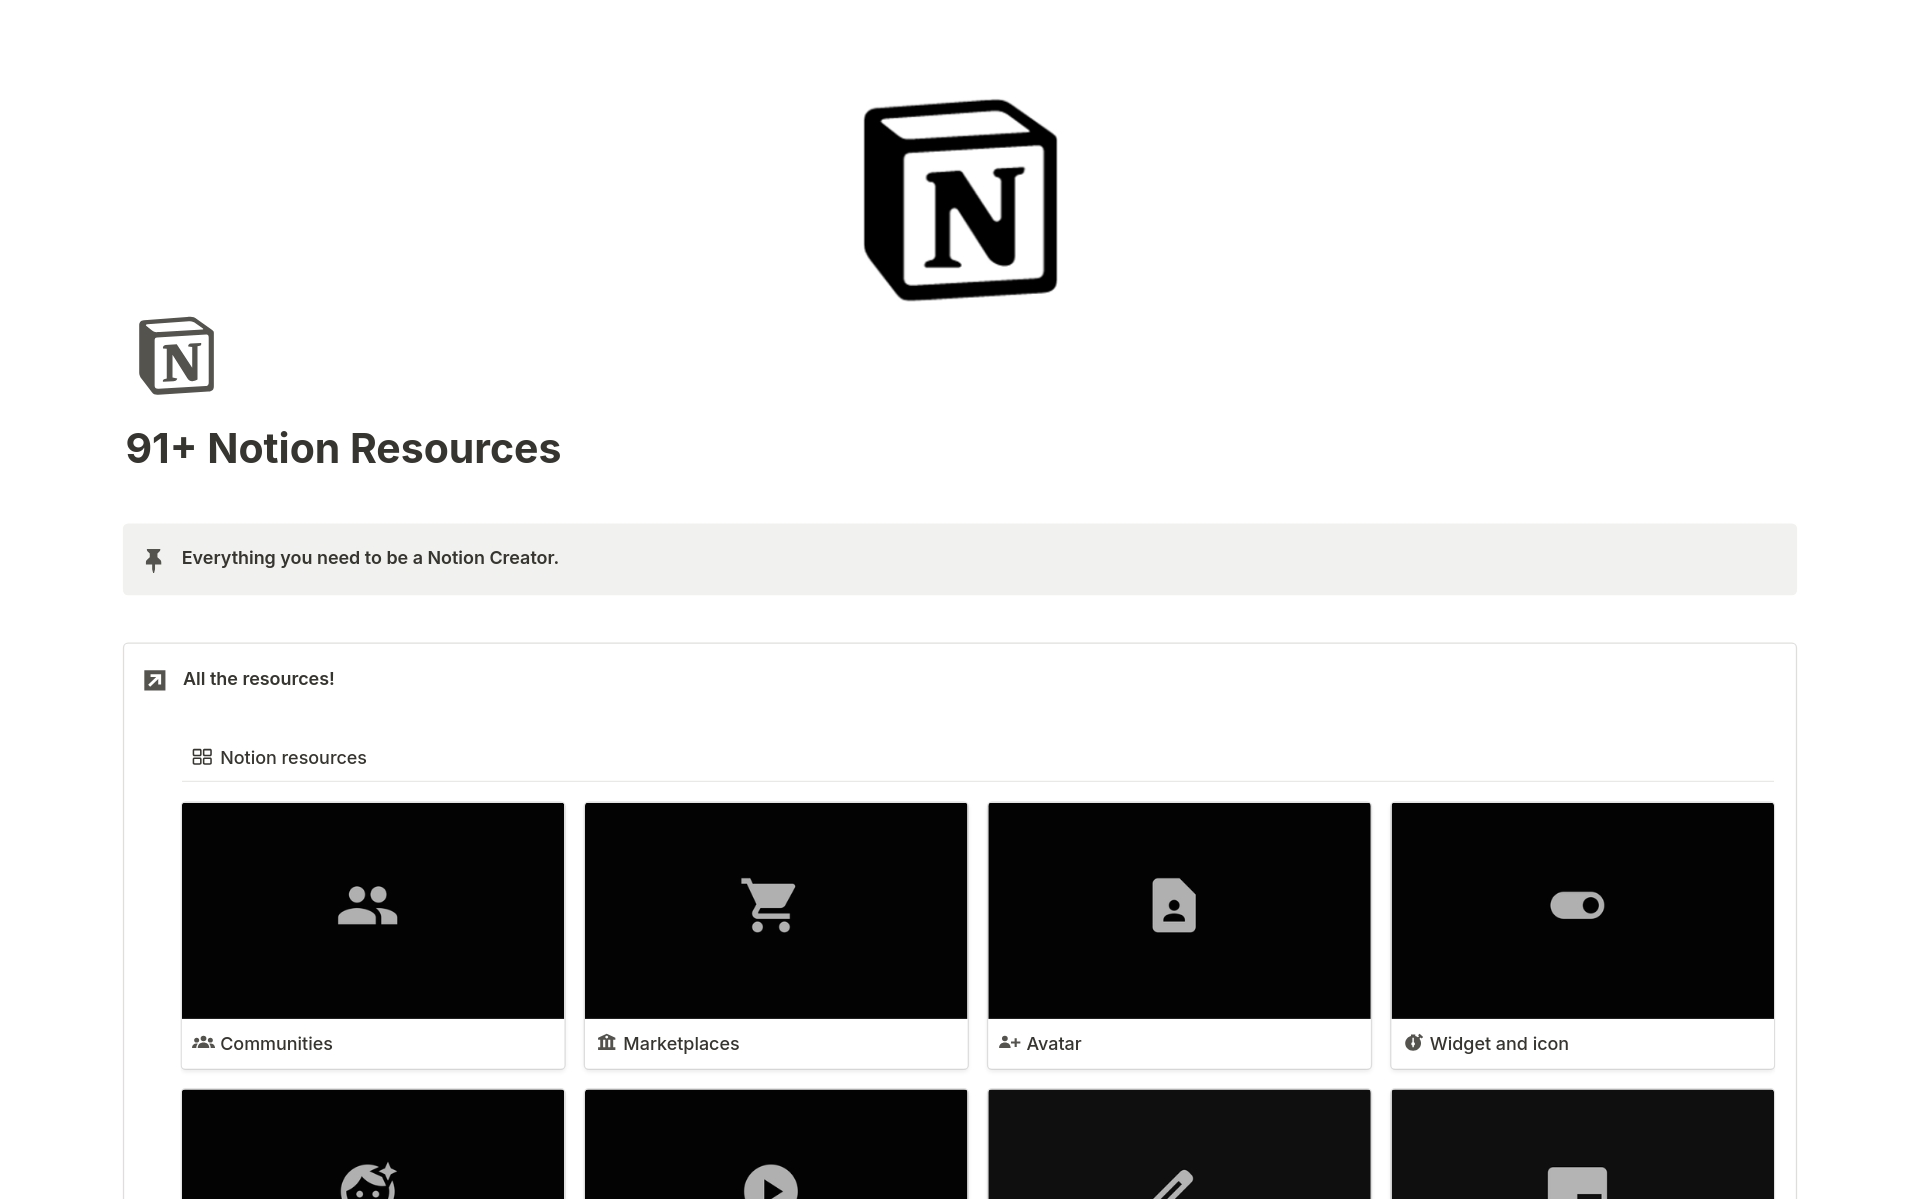 It is a Notion resources list to get you started as a Notion creator. 